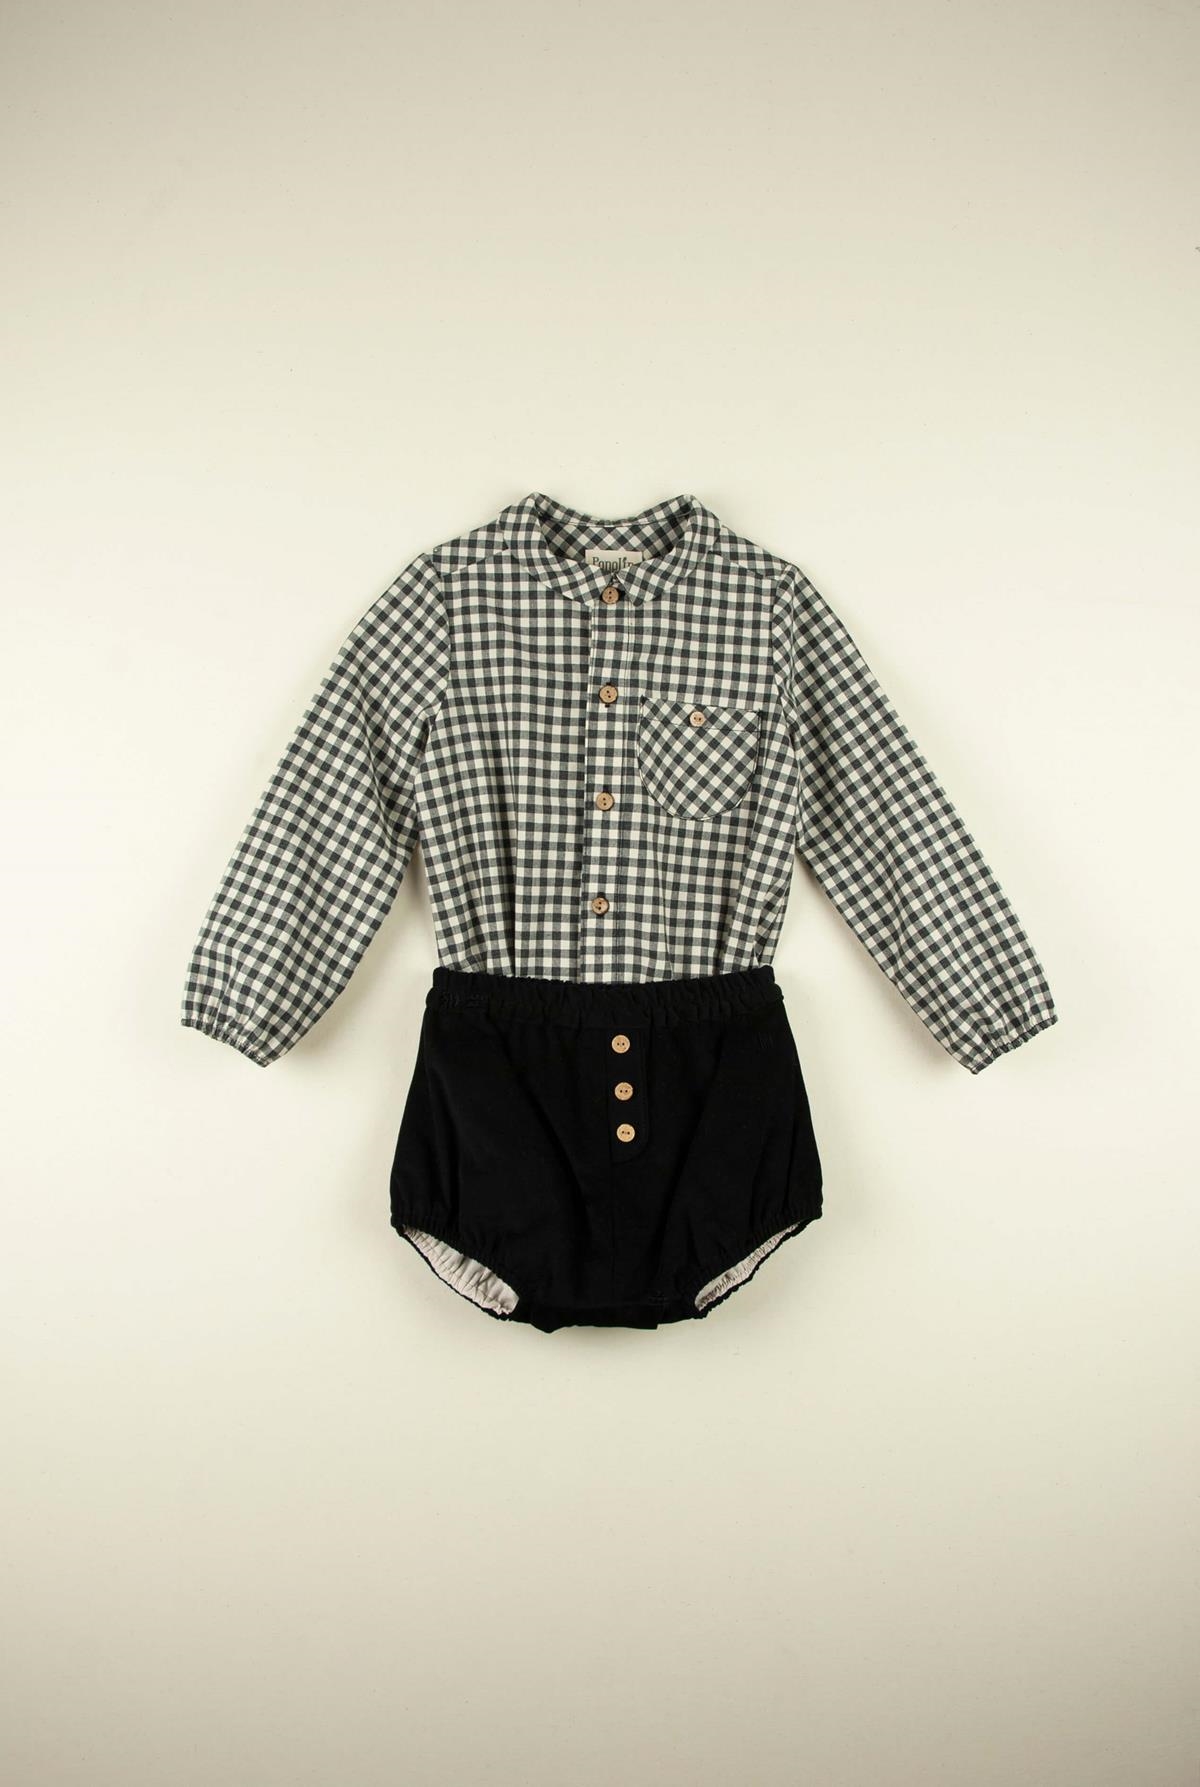 Mod.6.2 Shirt-style gingham romper suit | AW21.22 Mod.6.2 Shirt-style gingham romper suit | 1